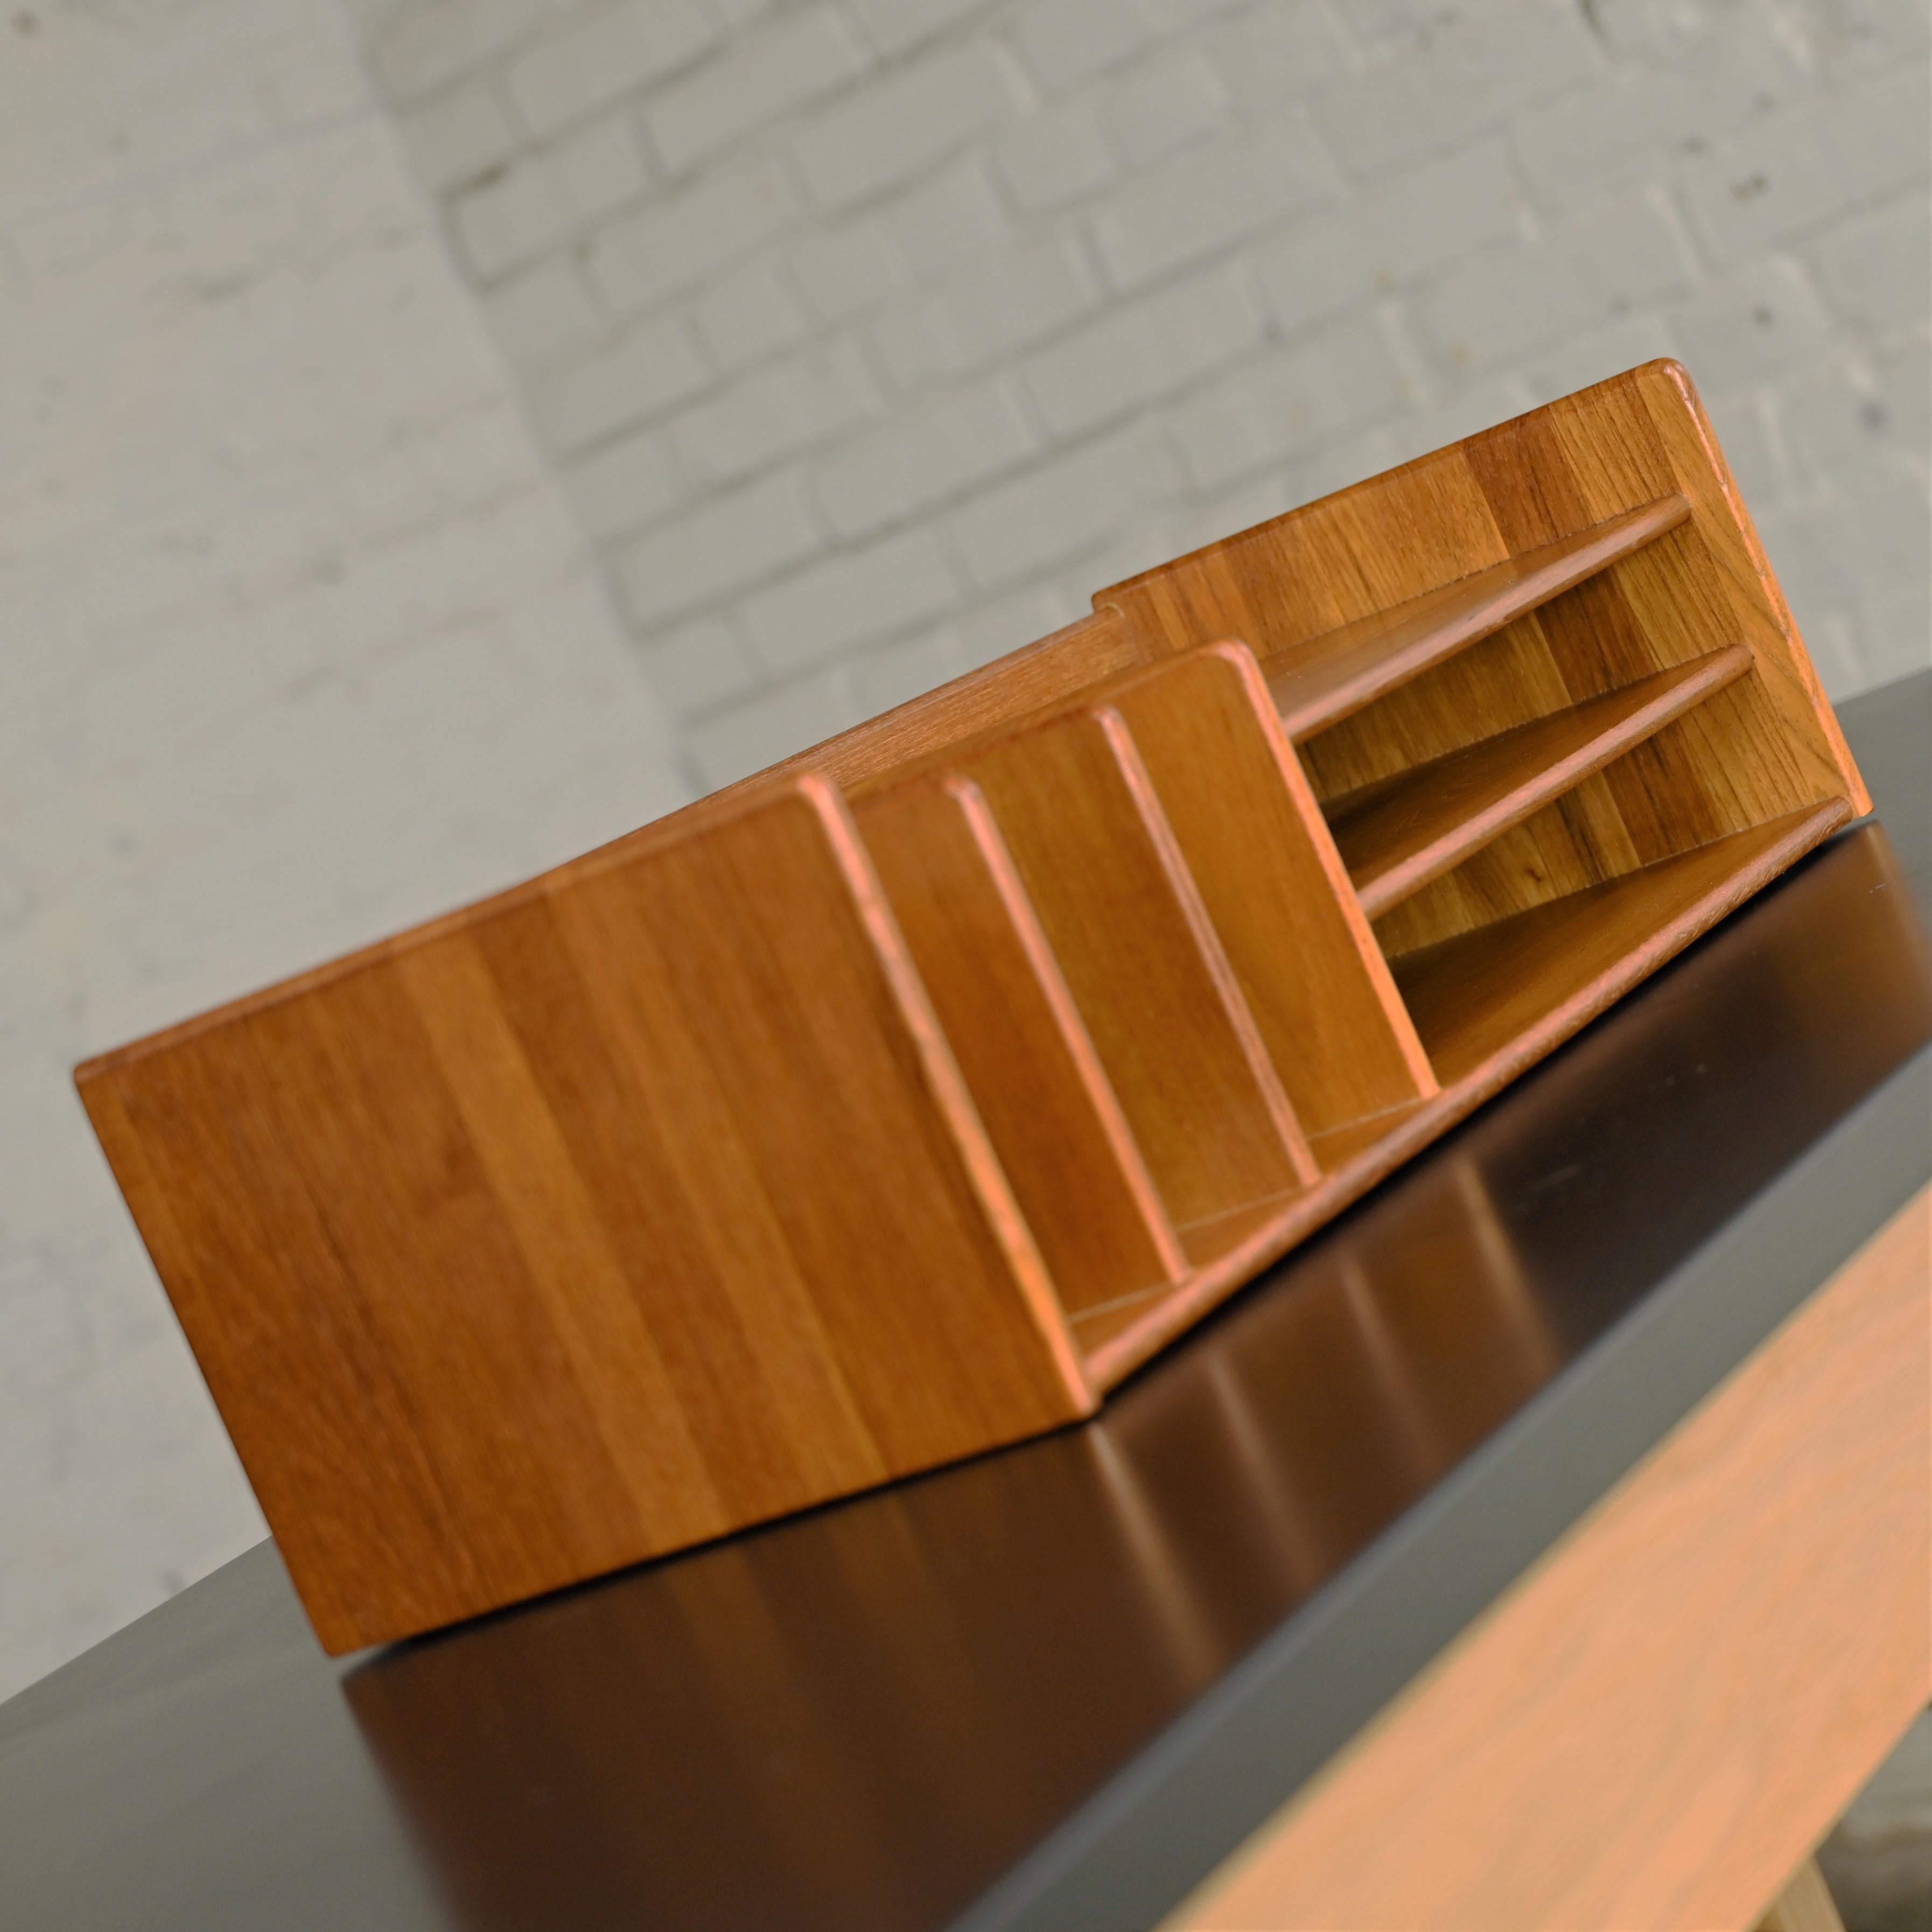 Fabulous Mid to Late 20th Century Scandinavian Modern teak desktop organizer. Beautiful condition, keeping in mind that this is vintage and not new so will have signs of use and wear. Please see photos and zoom in for details. We attempt to portray